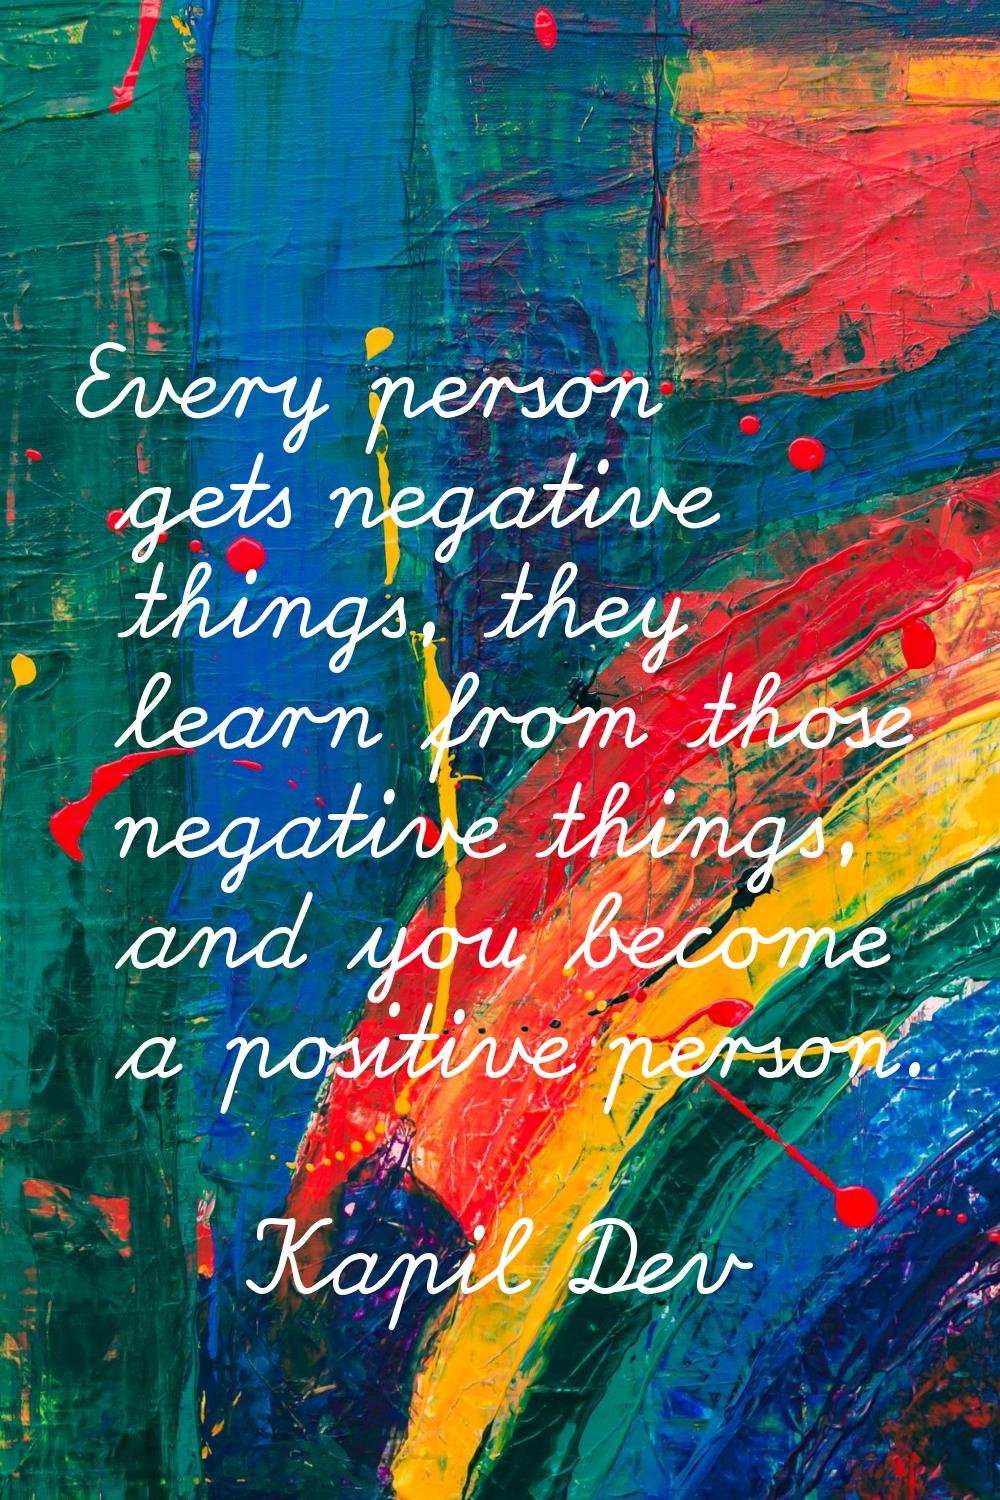 Every person gets negative things, they learn from those negative things, and you become a positive